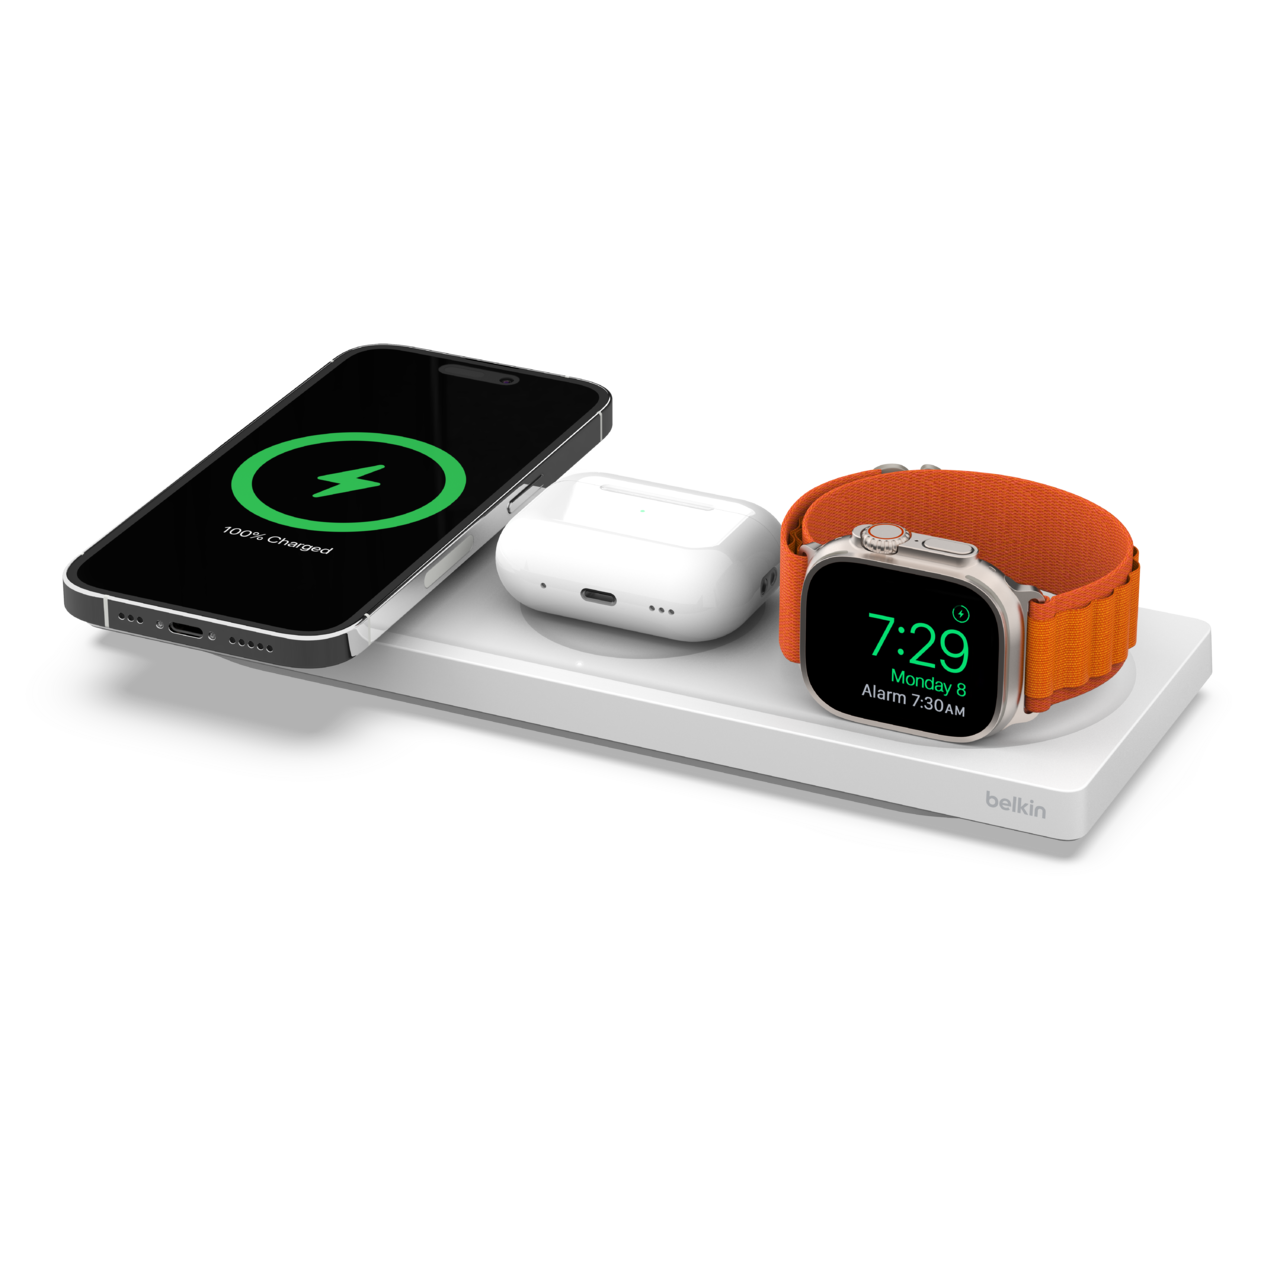 3-in-1 Apple MagSafe Wireless Charger Pad | Belkin US